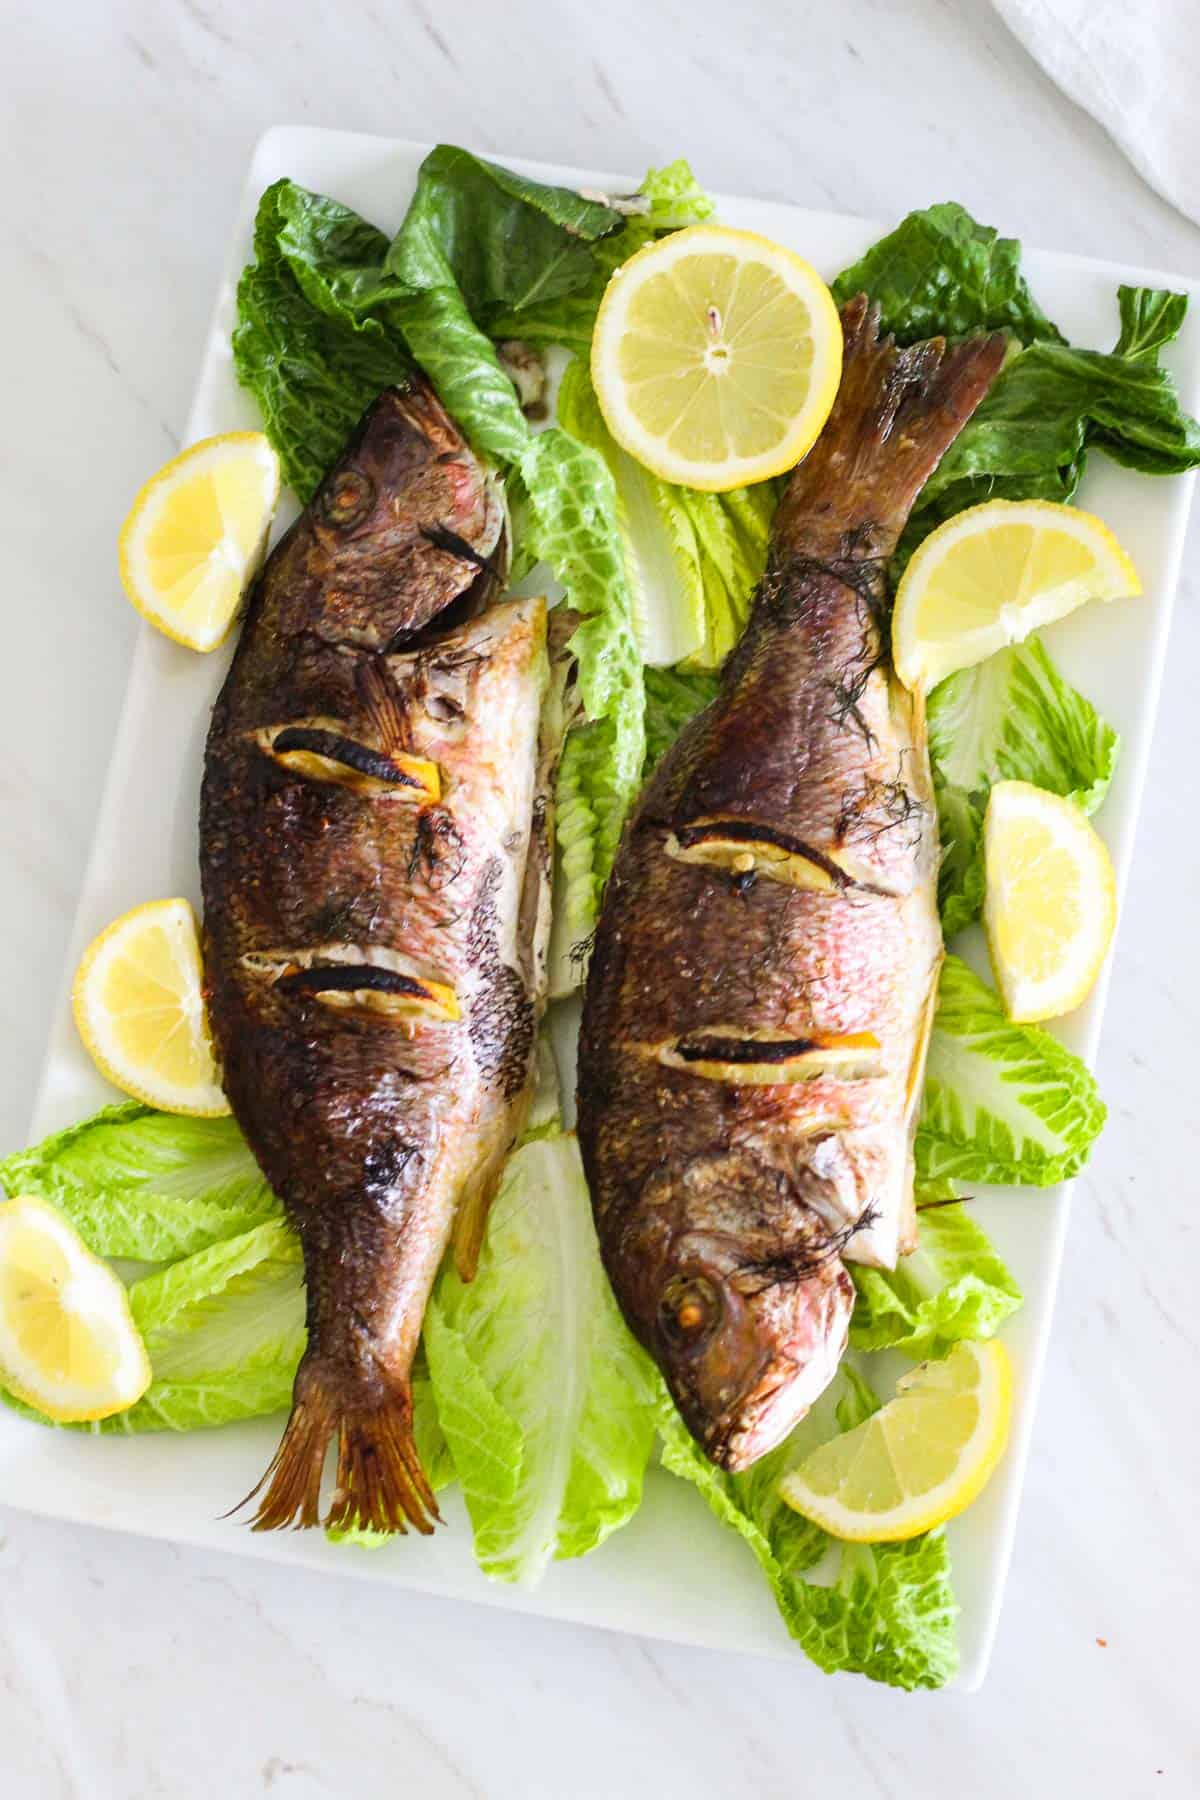 A rectangular platter showing 2 baked whole red snappers, over lettuce and garnished with fresh lemon slices.